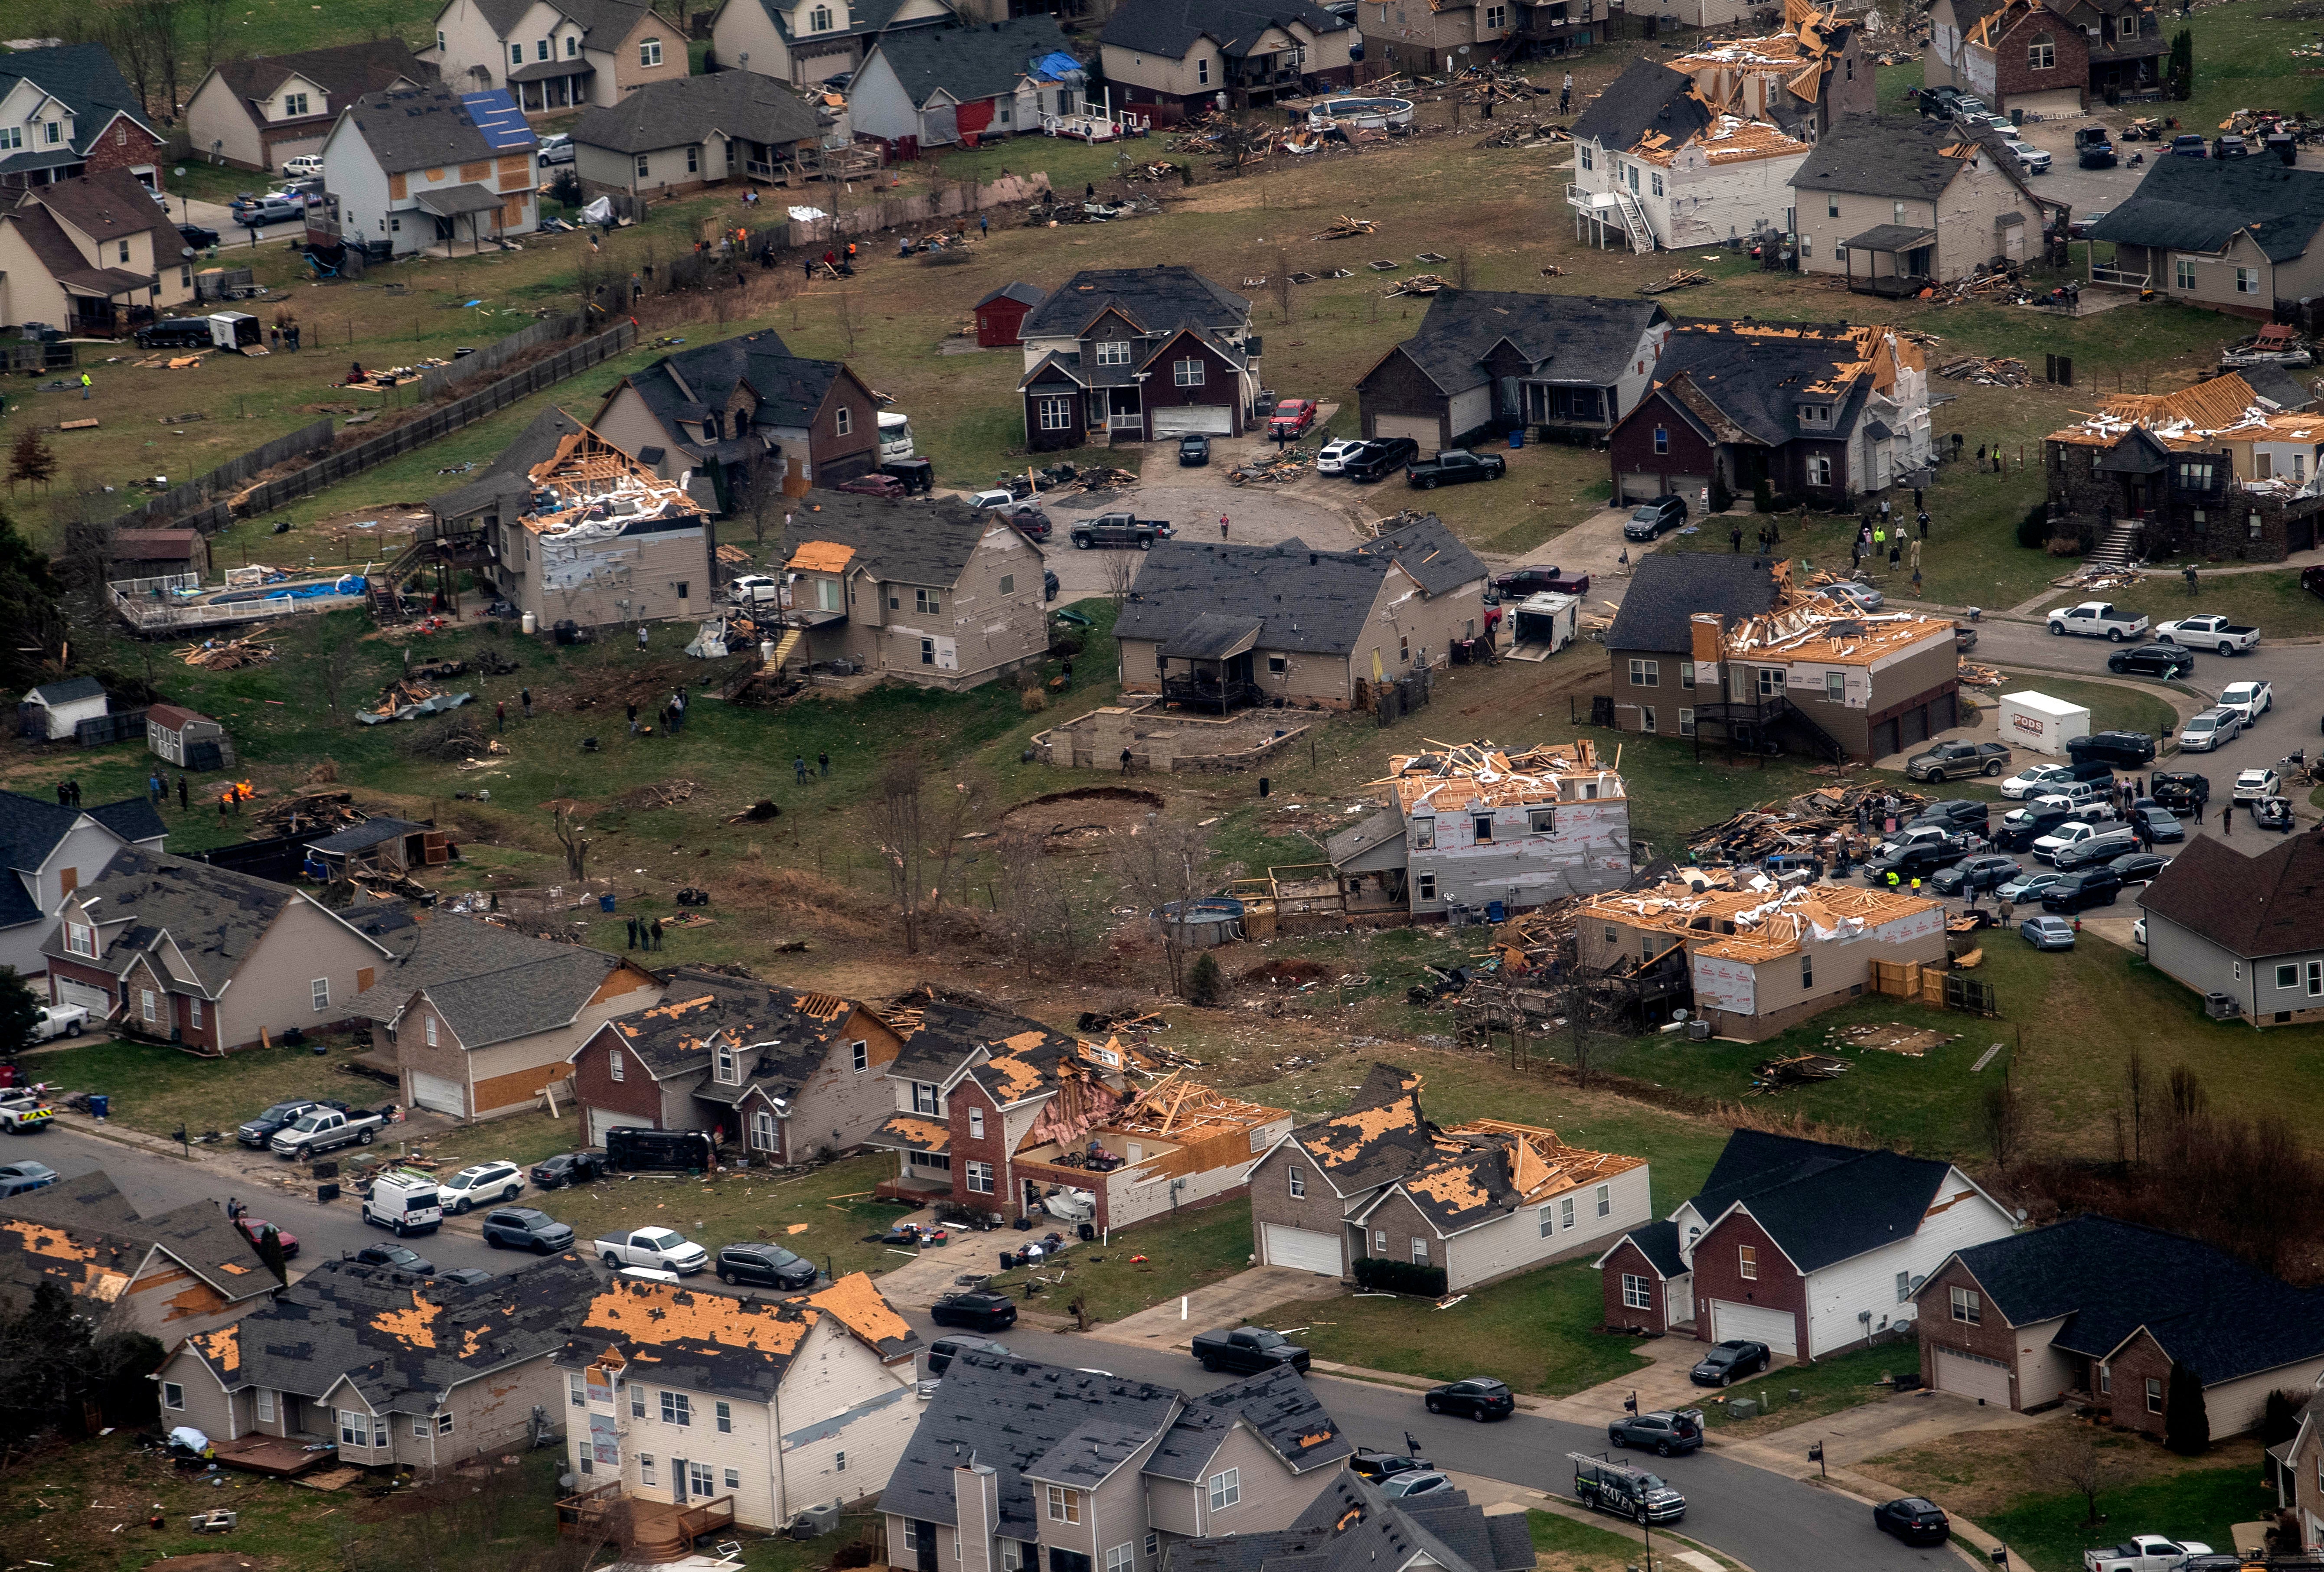 This aerial view from a Blackhawk helicopter shows damaged homes after a series of tornados swept through Tennessee